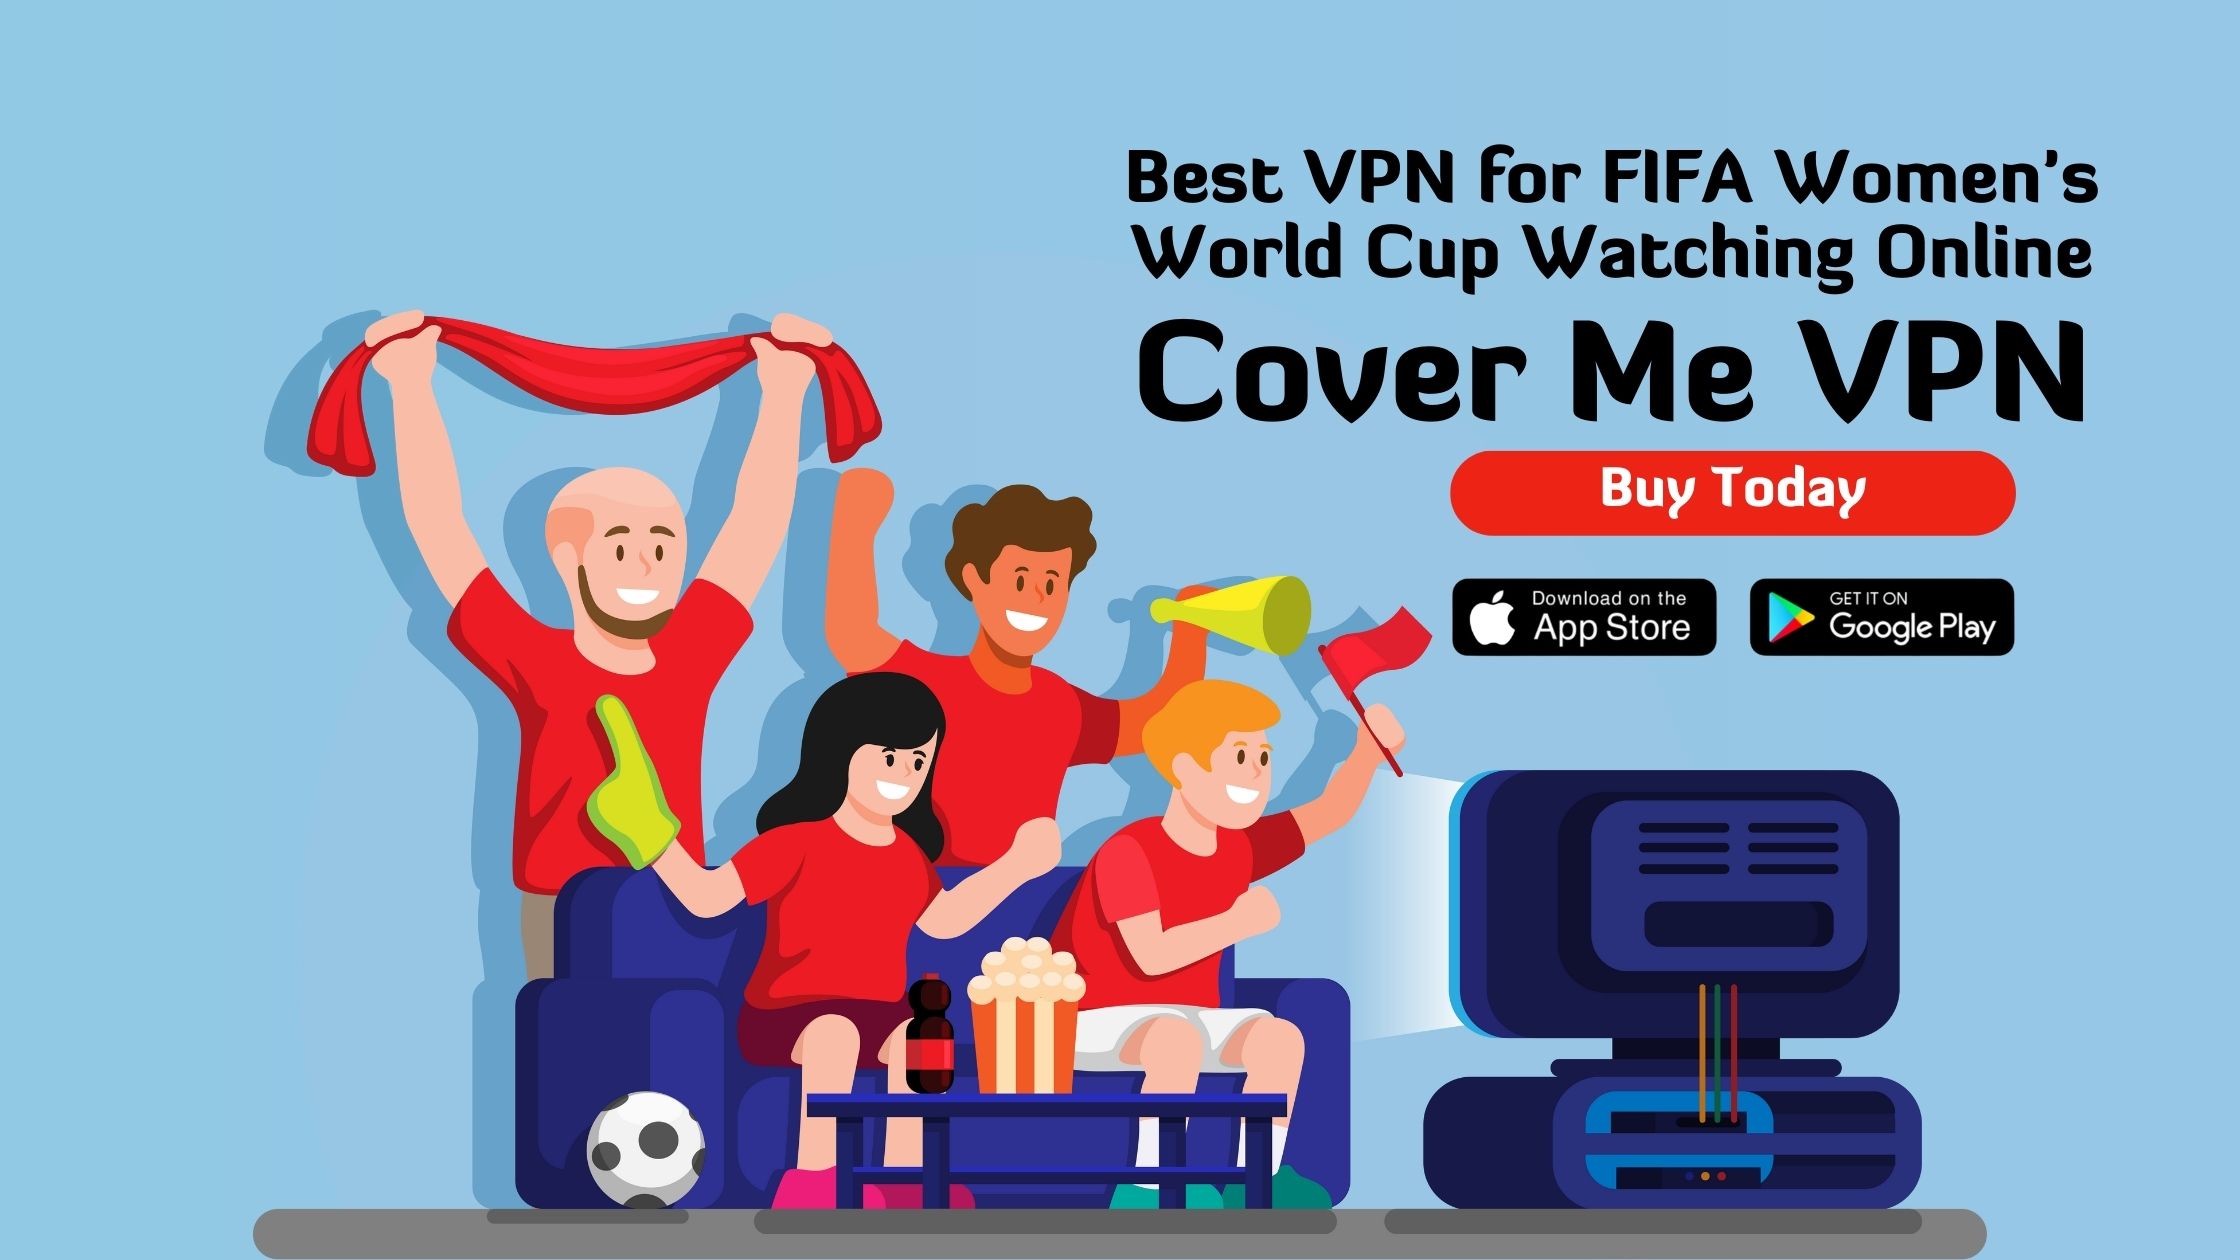 VPN for FIFA Women's World Cup